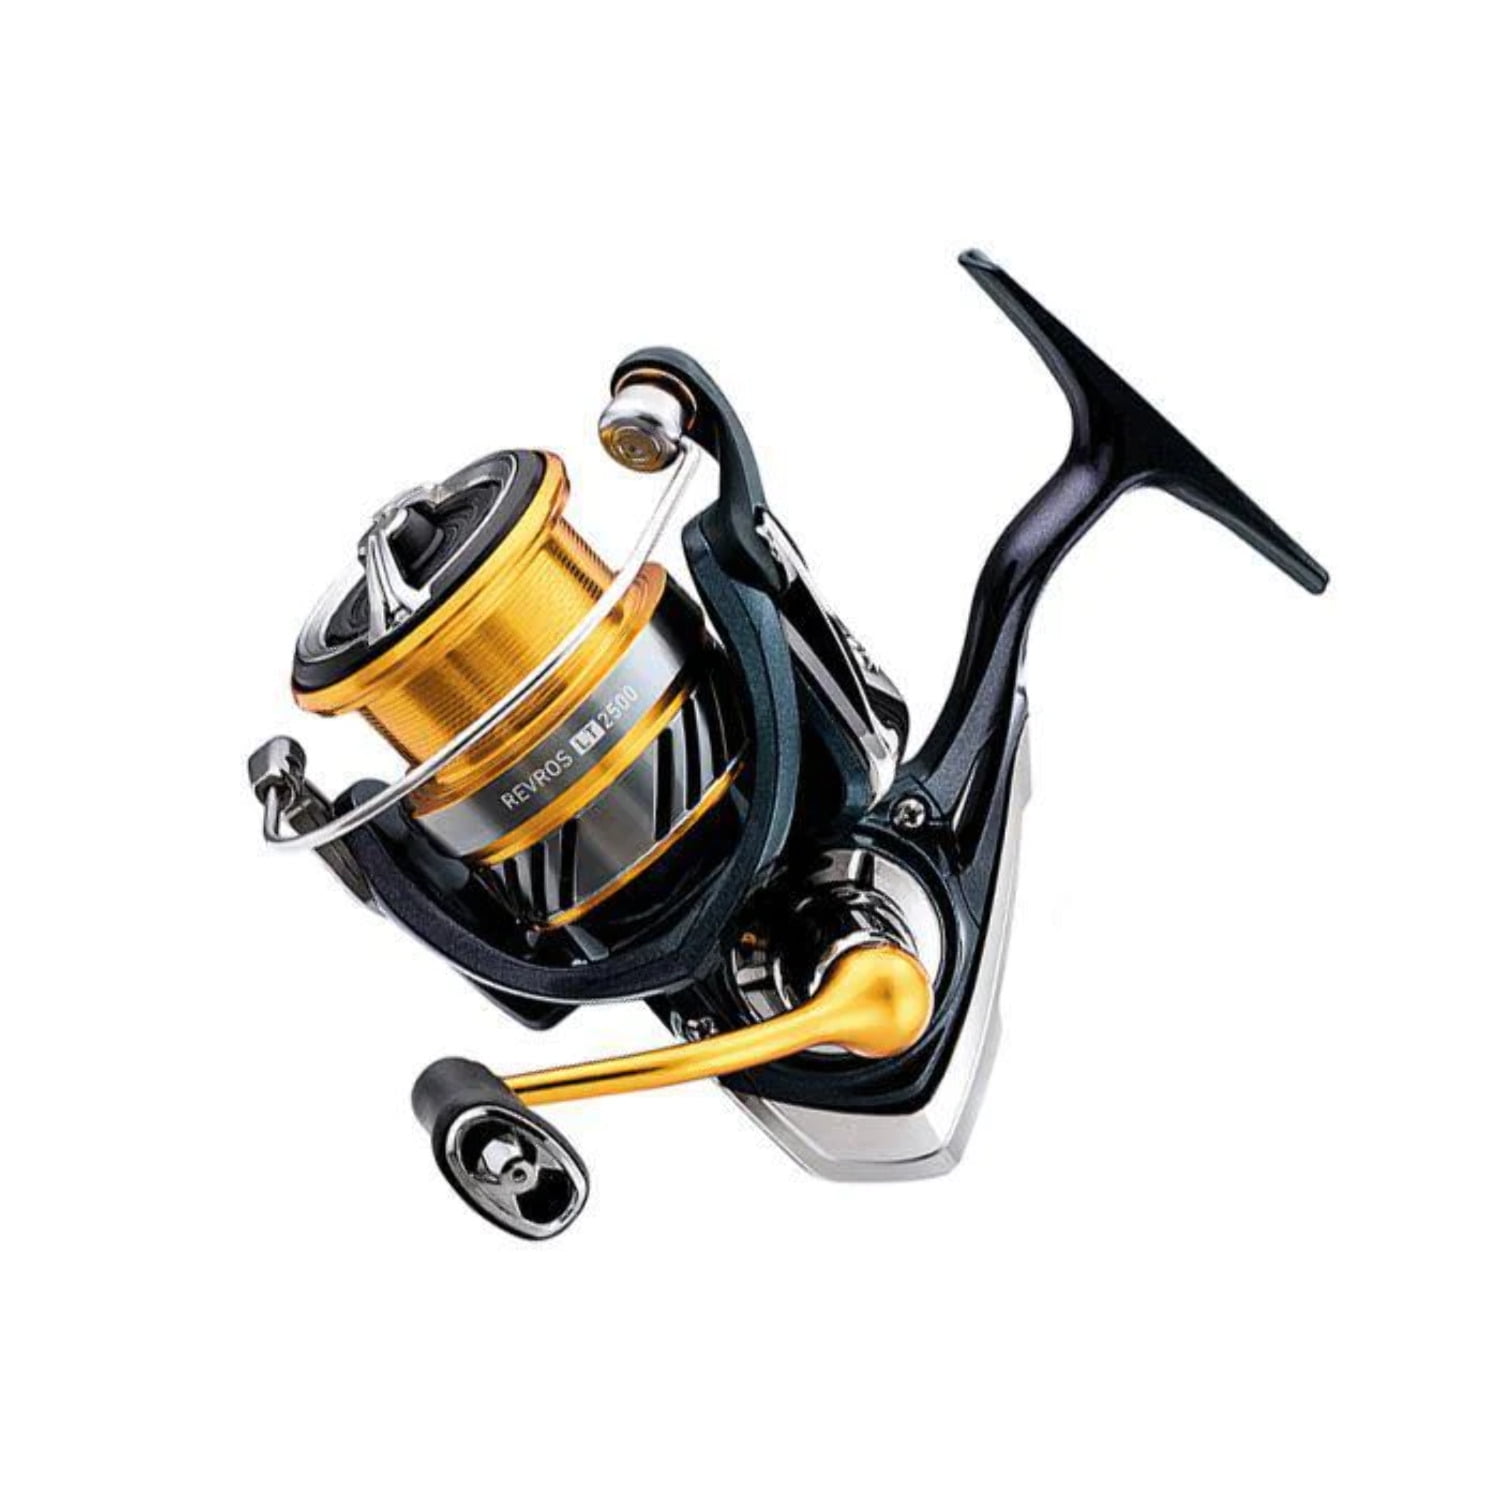 Spinning Reel Daiwa Revros LT - Nootica - Water addicts, like you!